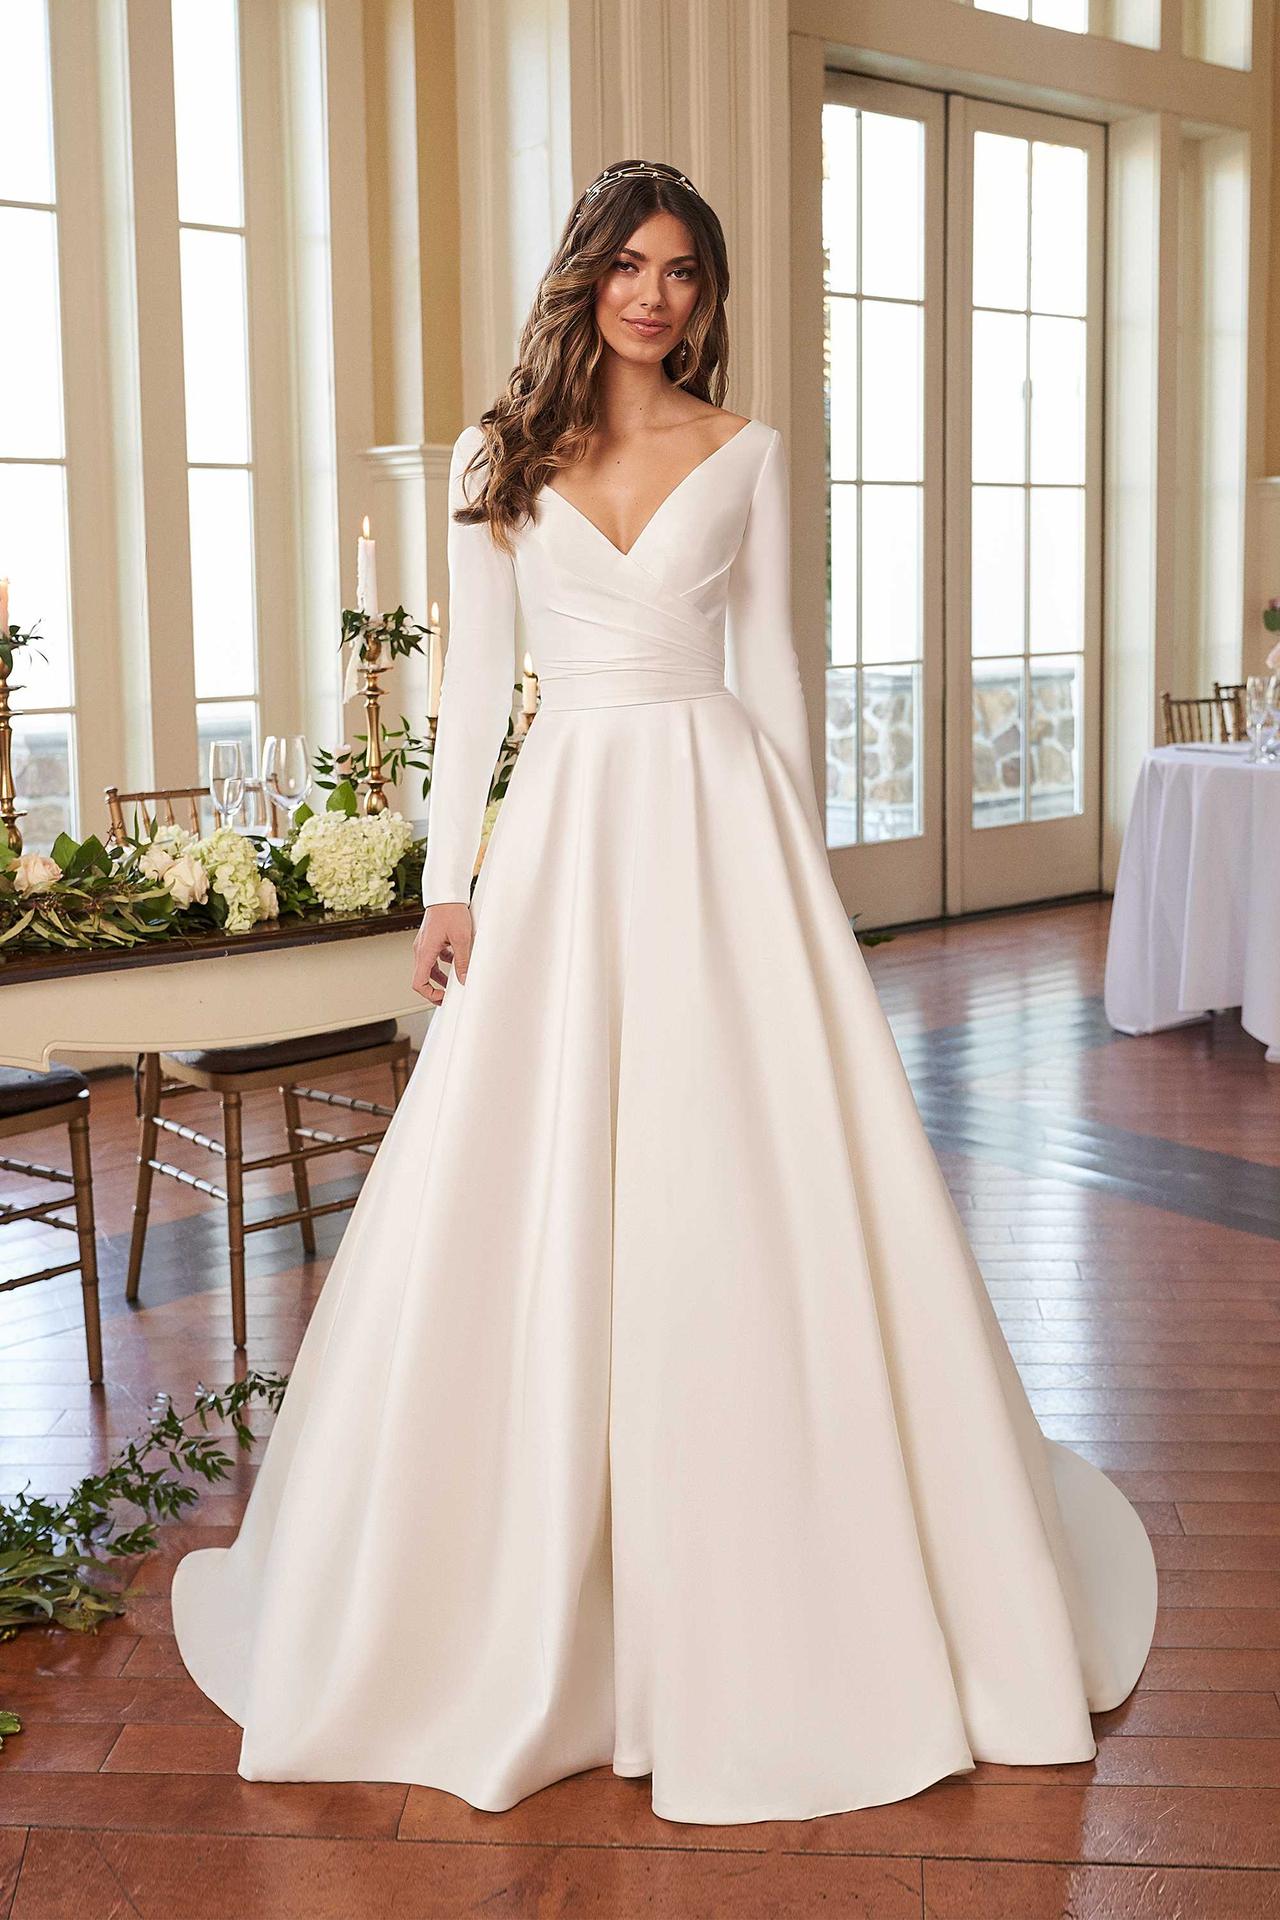 DFDG Off The Shoulder Prom Dress Long Ball Gown India | Ubuy